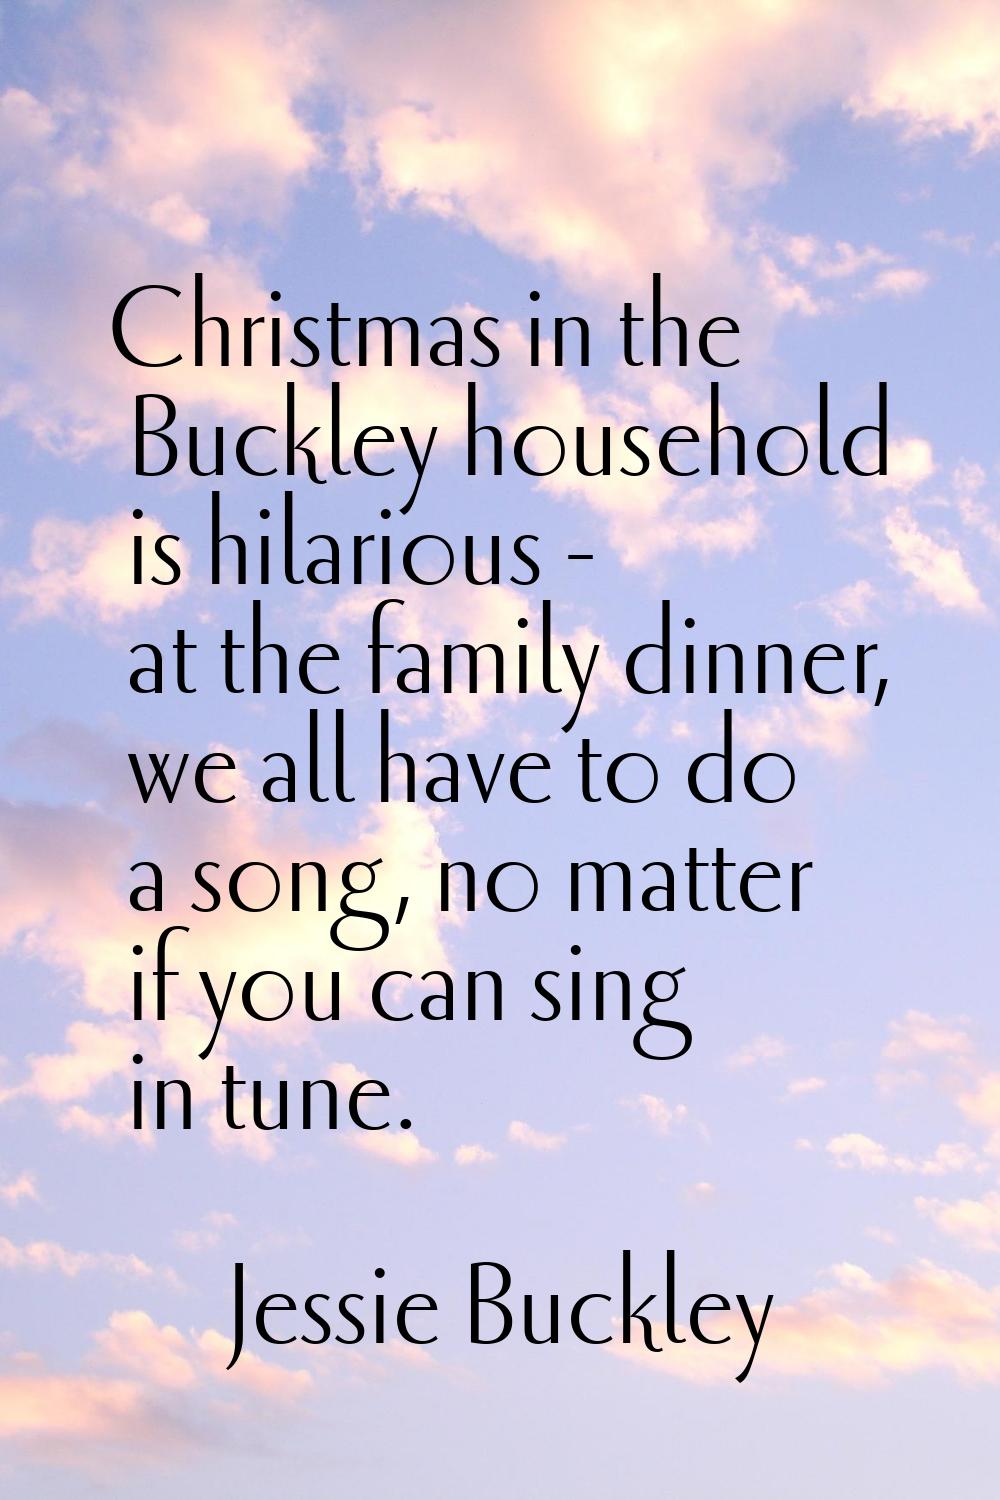 Christmas in the Buckley household is hilarious - at the family dinner, we all have to do a song, n